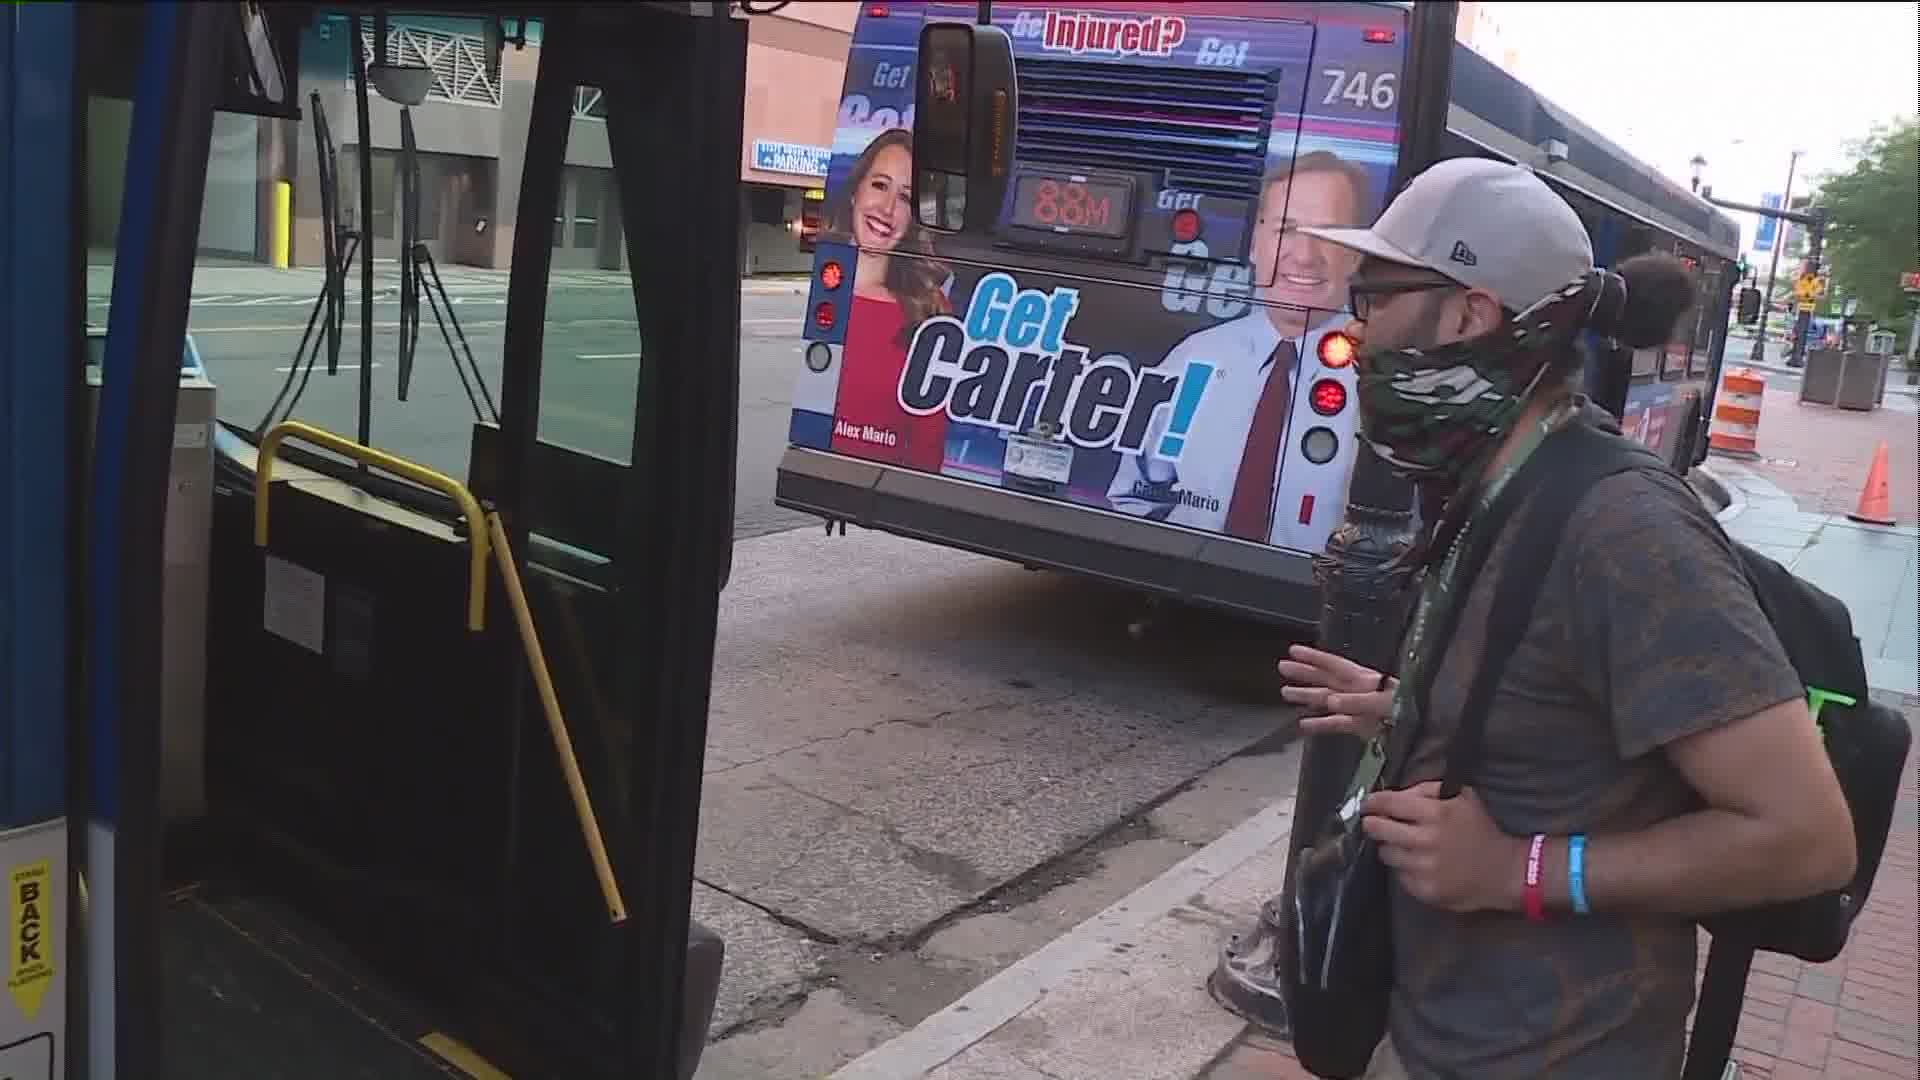 Masks are a requirement in order to ride public transit in Connecticut